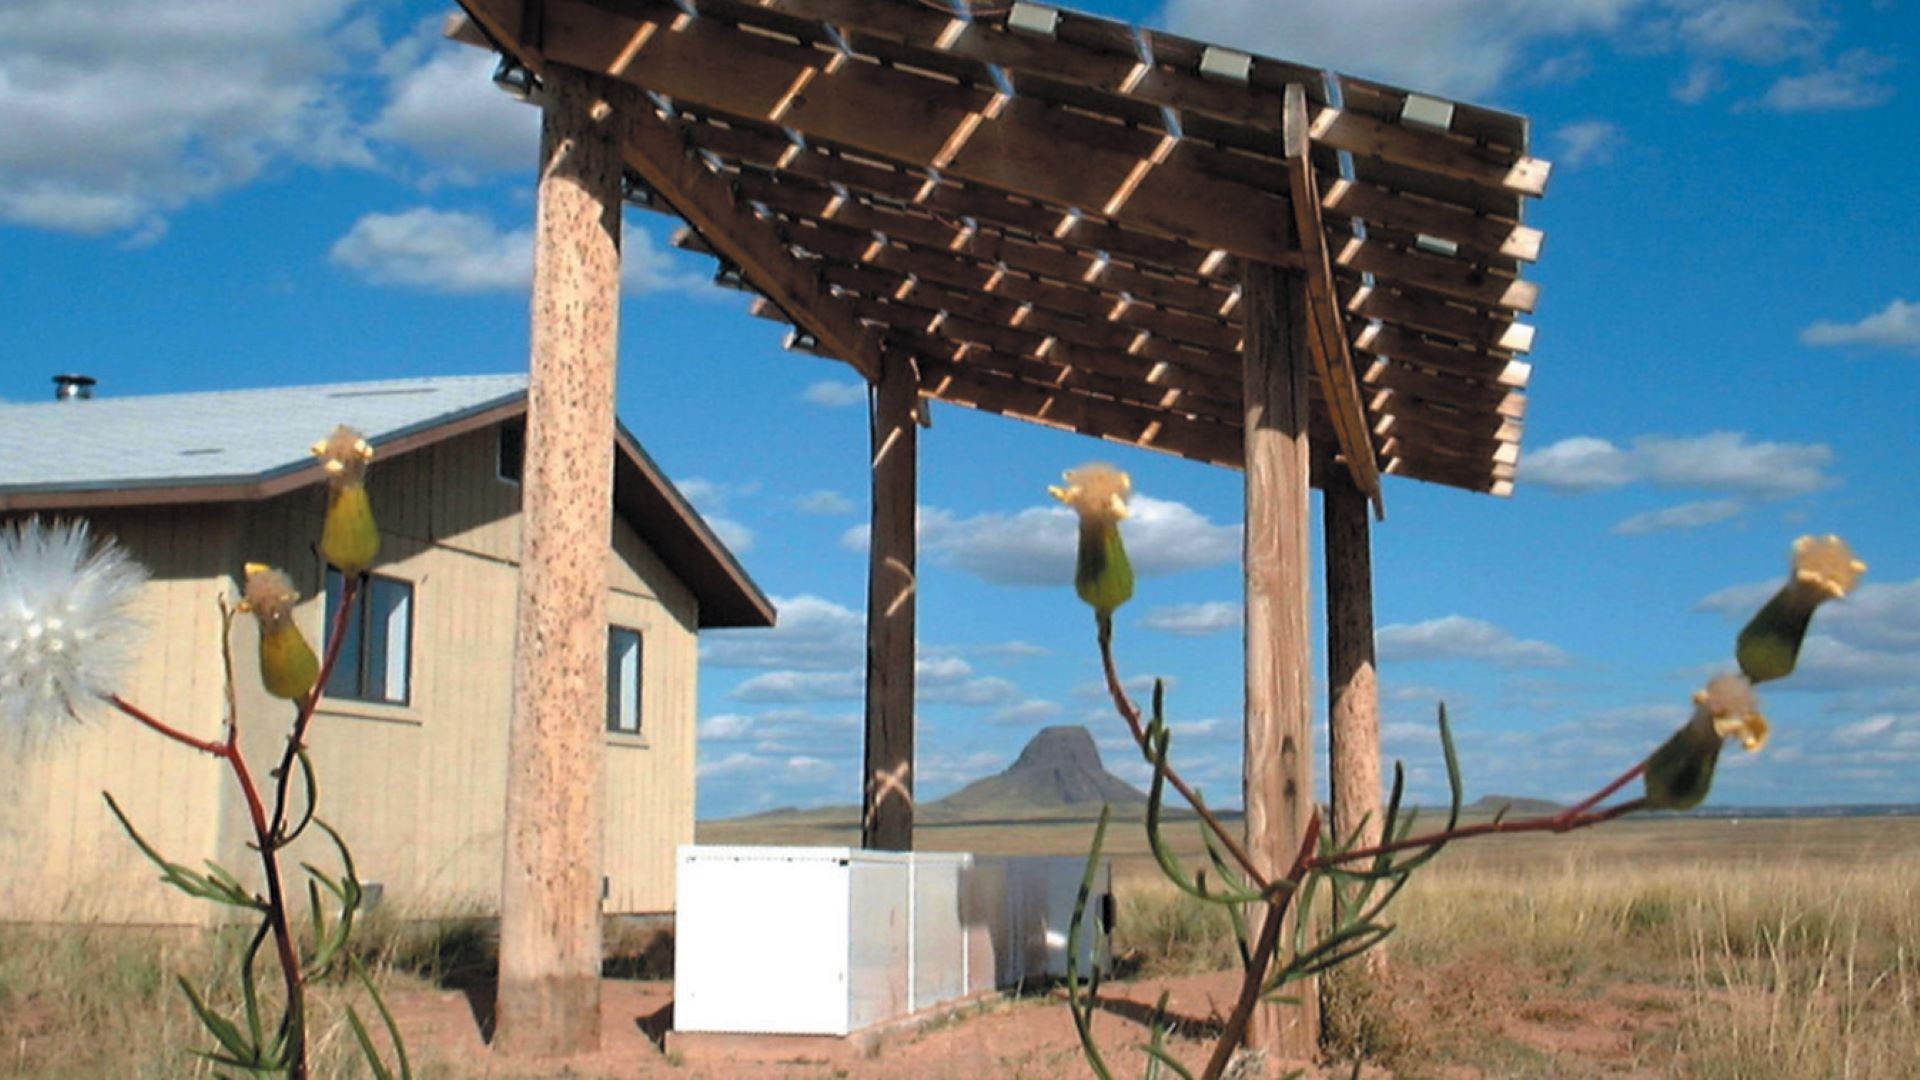 Solar electric array on off-grid Navajo home in Arizona, US